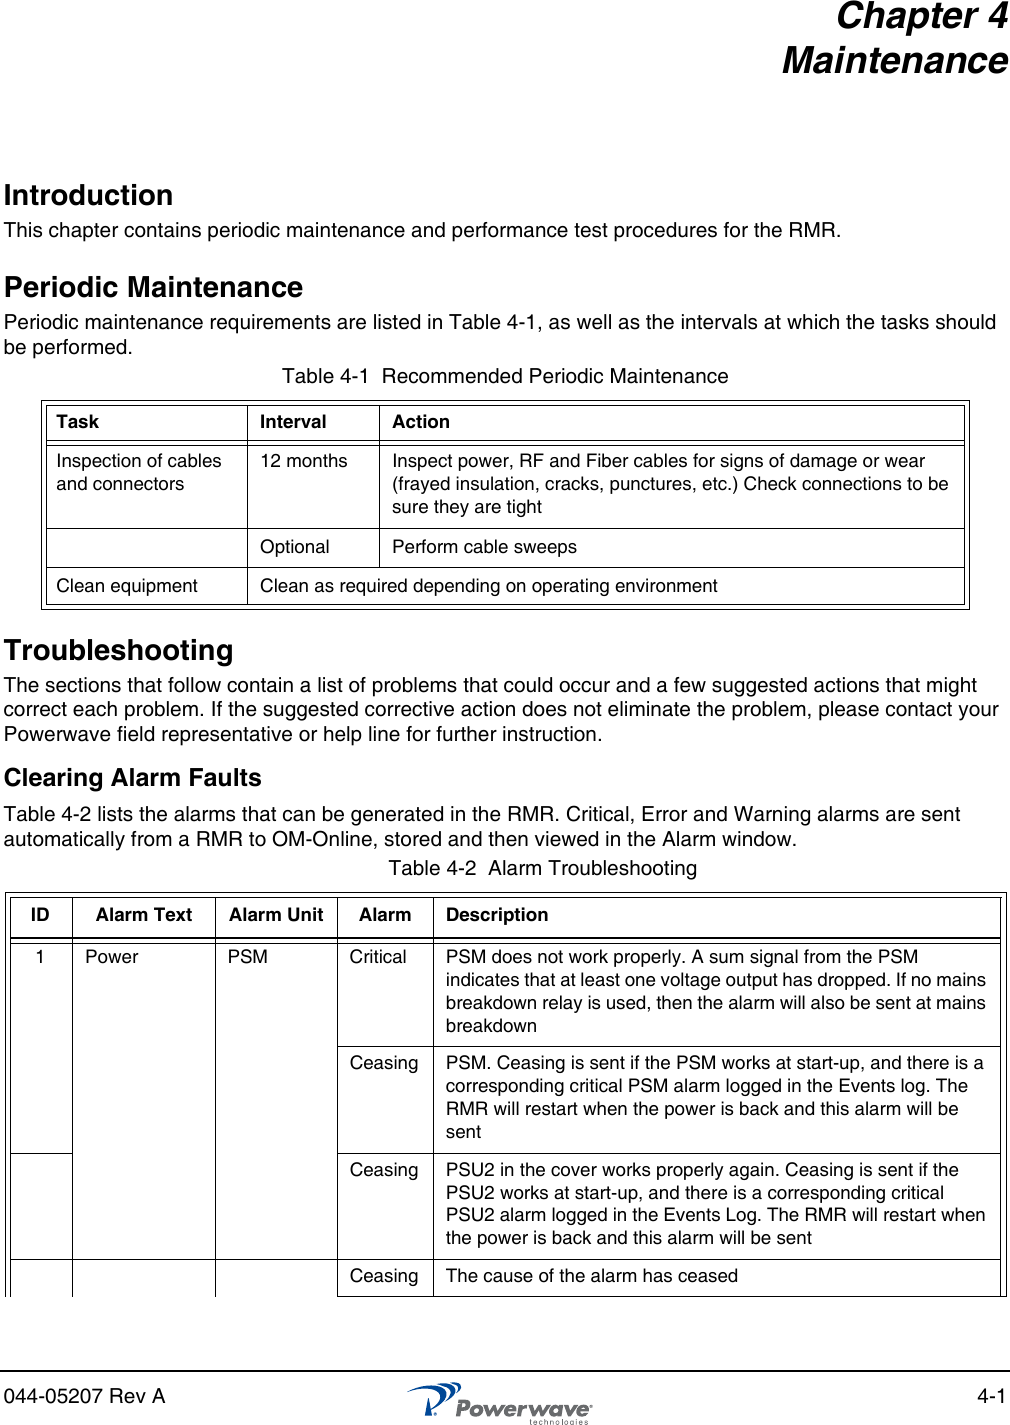 044-05207 Rev A 4-1Chapter 4MaintenanceIntroductionThis chapter contains periodic maintenance and performance test procedures for the RMR.Periodic MaintenancePeriodic maintenance requirements are listed in Table 4-1, as well as the intervals at which the tasks should be performed.TroubleshootingThe sections that follow contain a list of problems that could occur and a few suggested actions that might correct each problem. If the suggested corrective action does not eliminate the problem, please contact your Powerwave field representative or help line for further instruction.Clearing Alarm FaultsTable 4-2 lists the alarms that can be generated in the RMR. Critical, Error and Warning alarms are sent automatically from a RMR to OM-Online, stored and then viewed in the Alarm window.Table 4-1  Recommended Periodic MaintenanceTask Interval ActionInspection of cables and connectors12 months Inspect power, RF and Fiber cables for signs of damage or wear (frayed insulation, cracks, punctures, etc.) Check connections to be sure they are tightOptional Perform cable sweepsClean equipment Clean as required depending on operating environmentTable 4-2  Alarm TroubleshootingID Alarm Text Alarm Unit Alarm Description1 Power PSM Critical PSM does not work properly. A sum signal from the PSM indicates that at least one voltage output has dropped. If no mains breakdown relay is used, then the alarm will also be sent at mains breakdownCeasing PSM. Ceasing is sent if the PSM works at start-up, and there is a corresponding critical PSM alarm logged in the Events log. The RMR will restart when the power is back and this alarm will be sentCeasing PSU2 in the cover works properly again. Ceasing is sent if the PSU2 works at start-up, and there is a corresponding critical PSU2 alarm logged in the Events Log. The RMR will restart when the power is back and this alarm will be sentCeasing The cause of the alarm has ceased